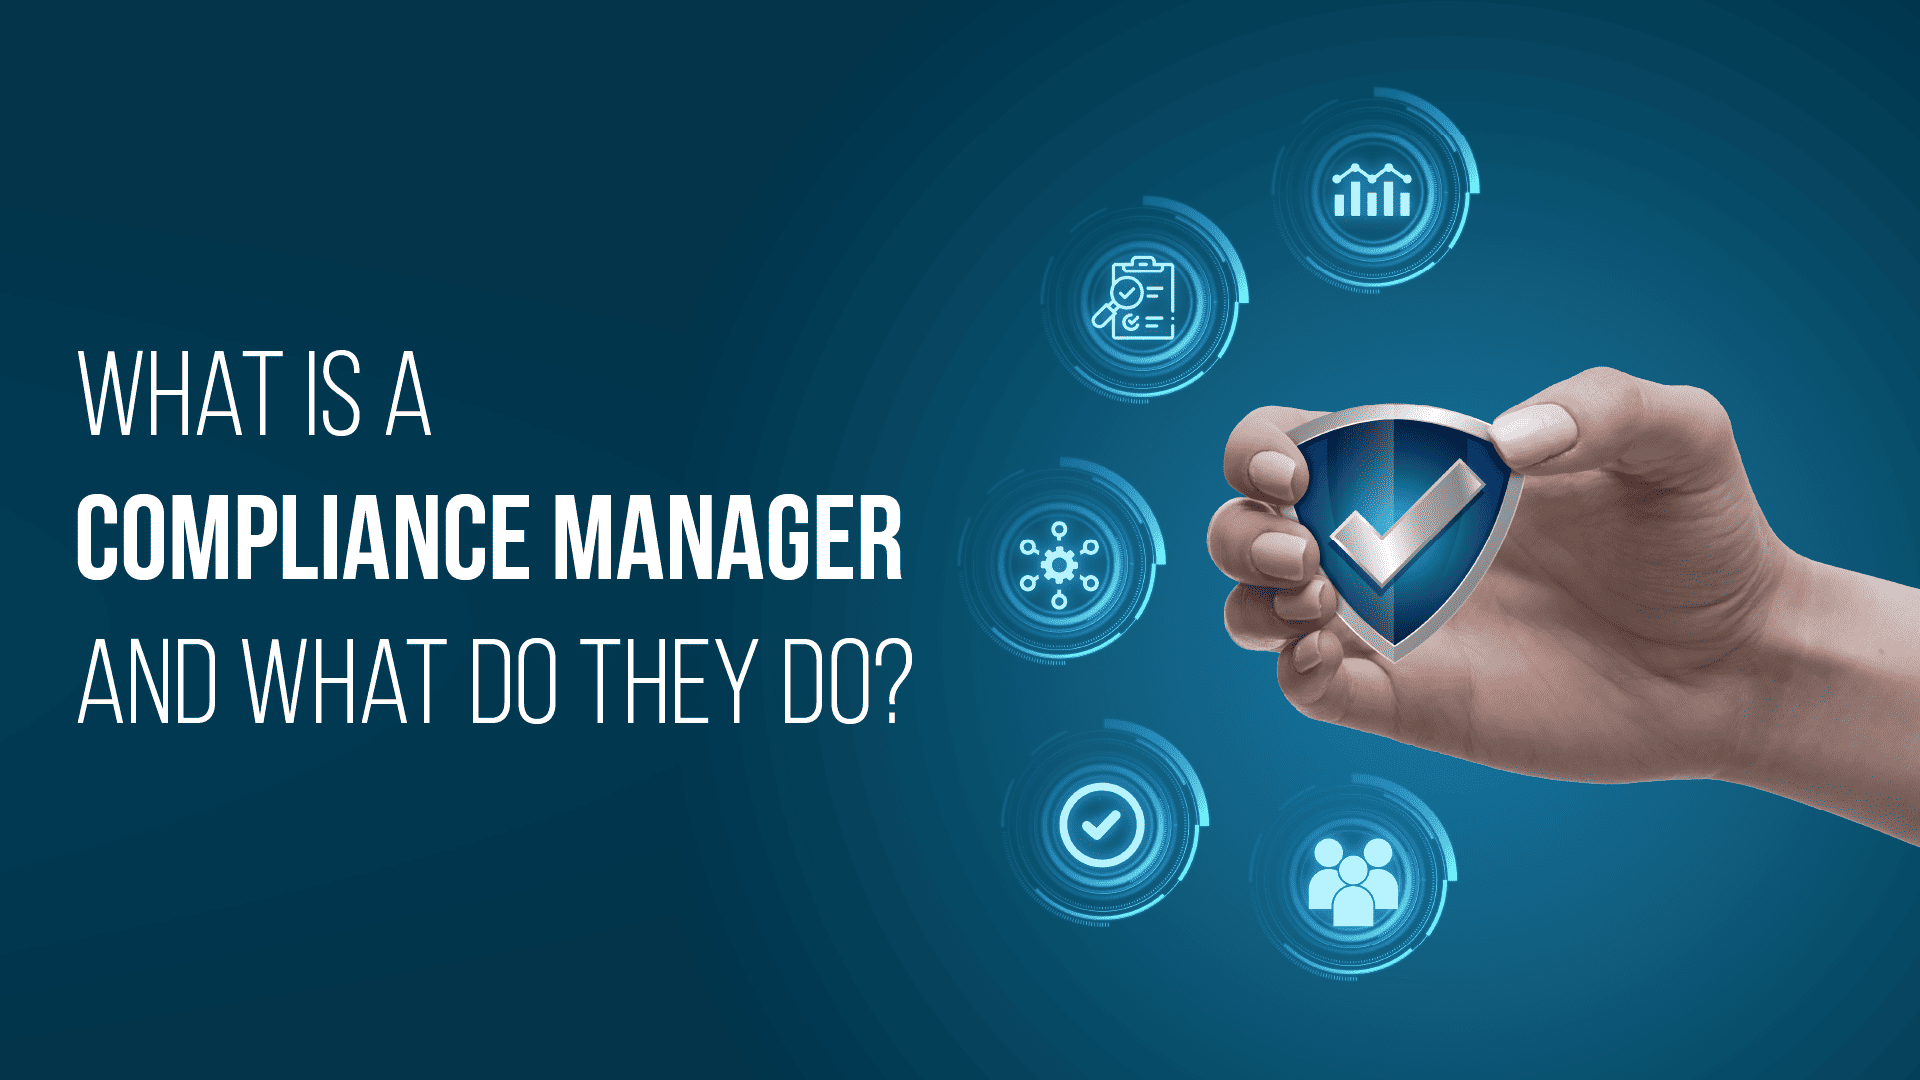 What is a Compliance Manager and What do They do?